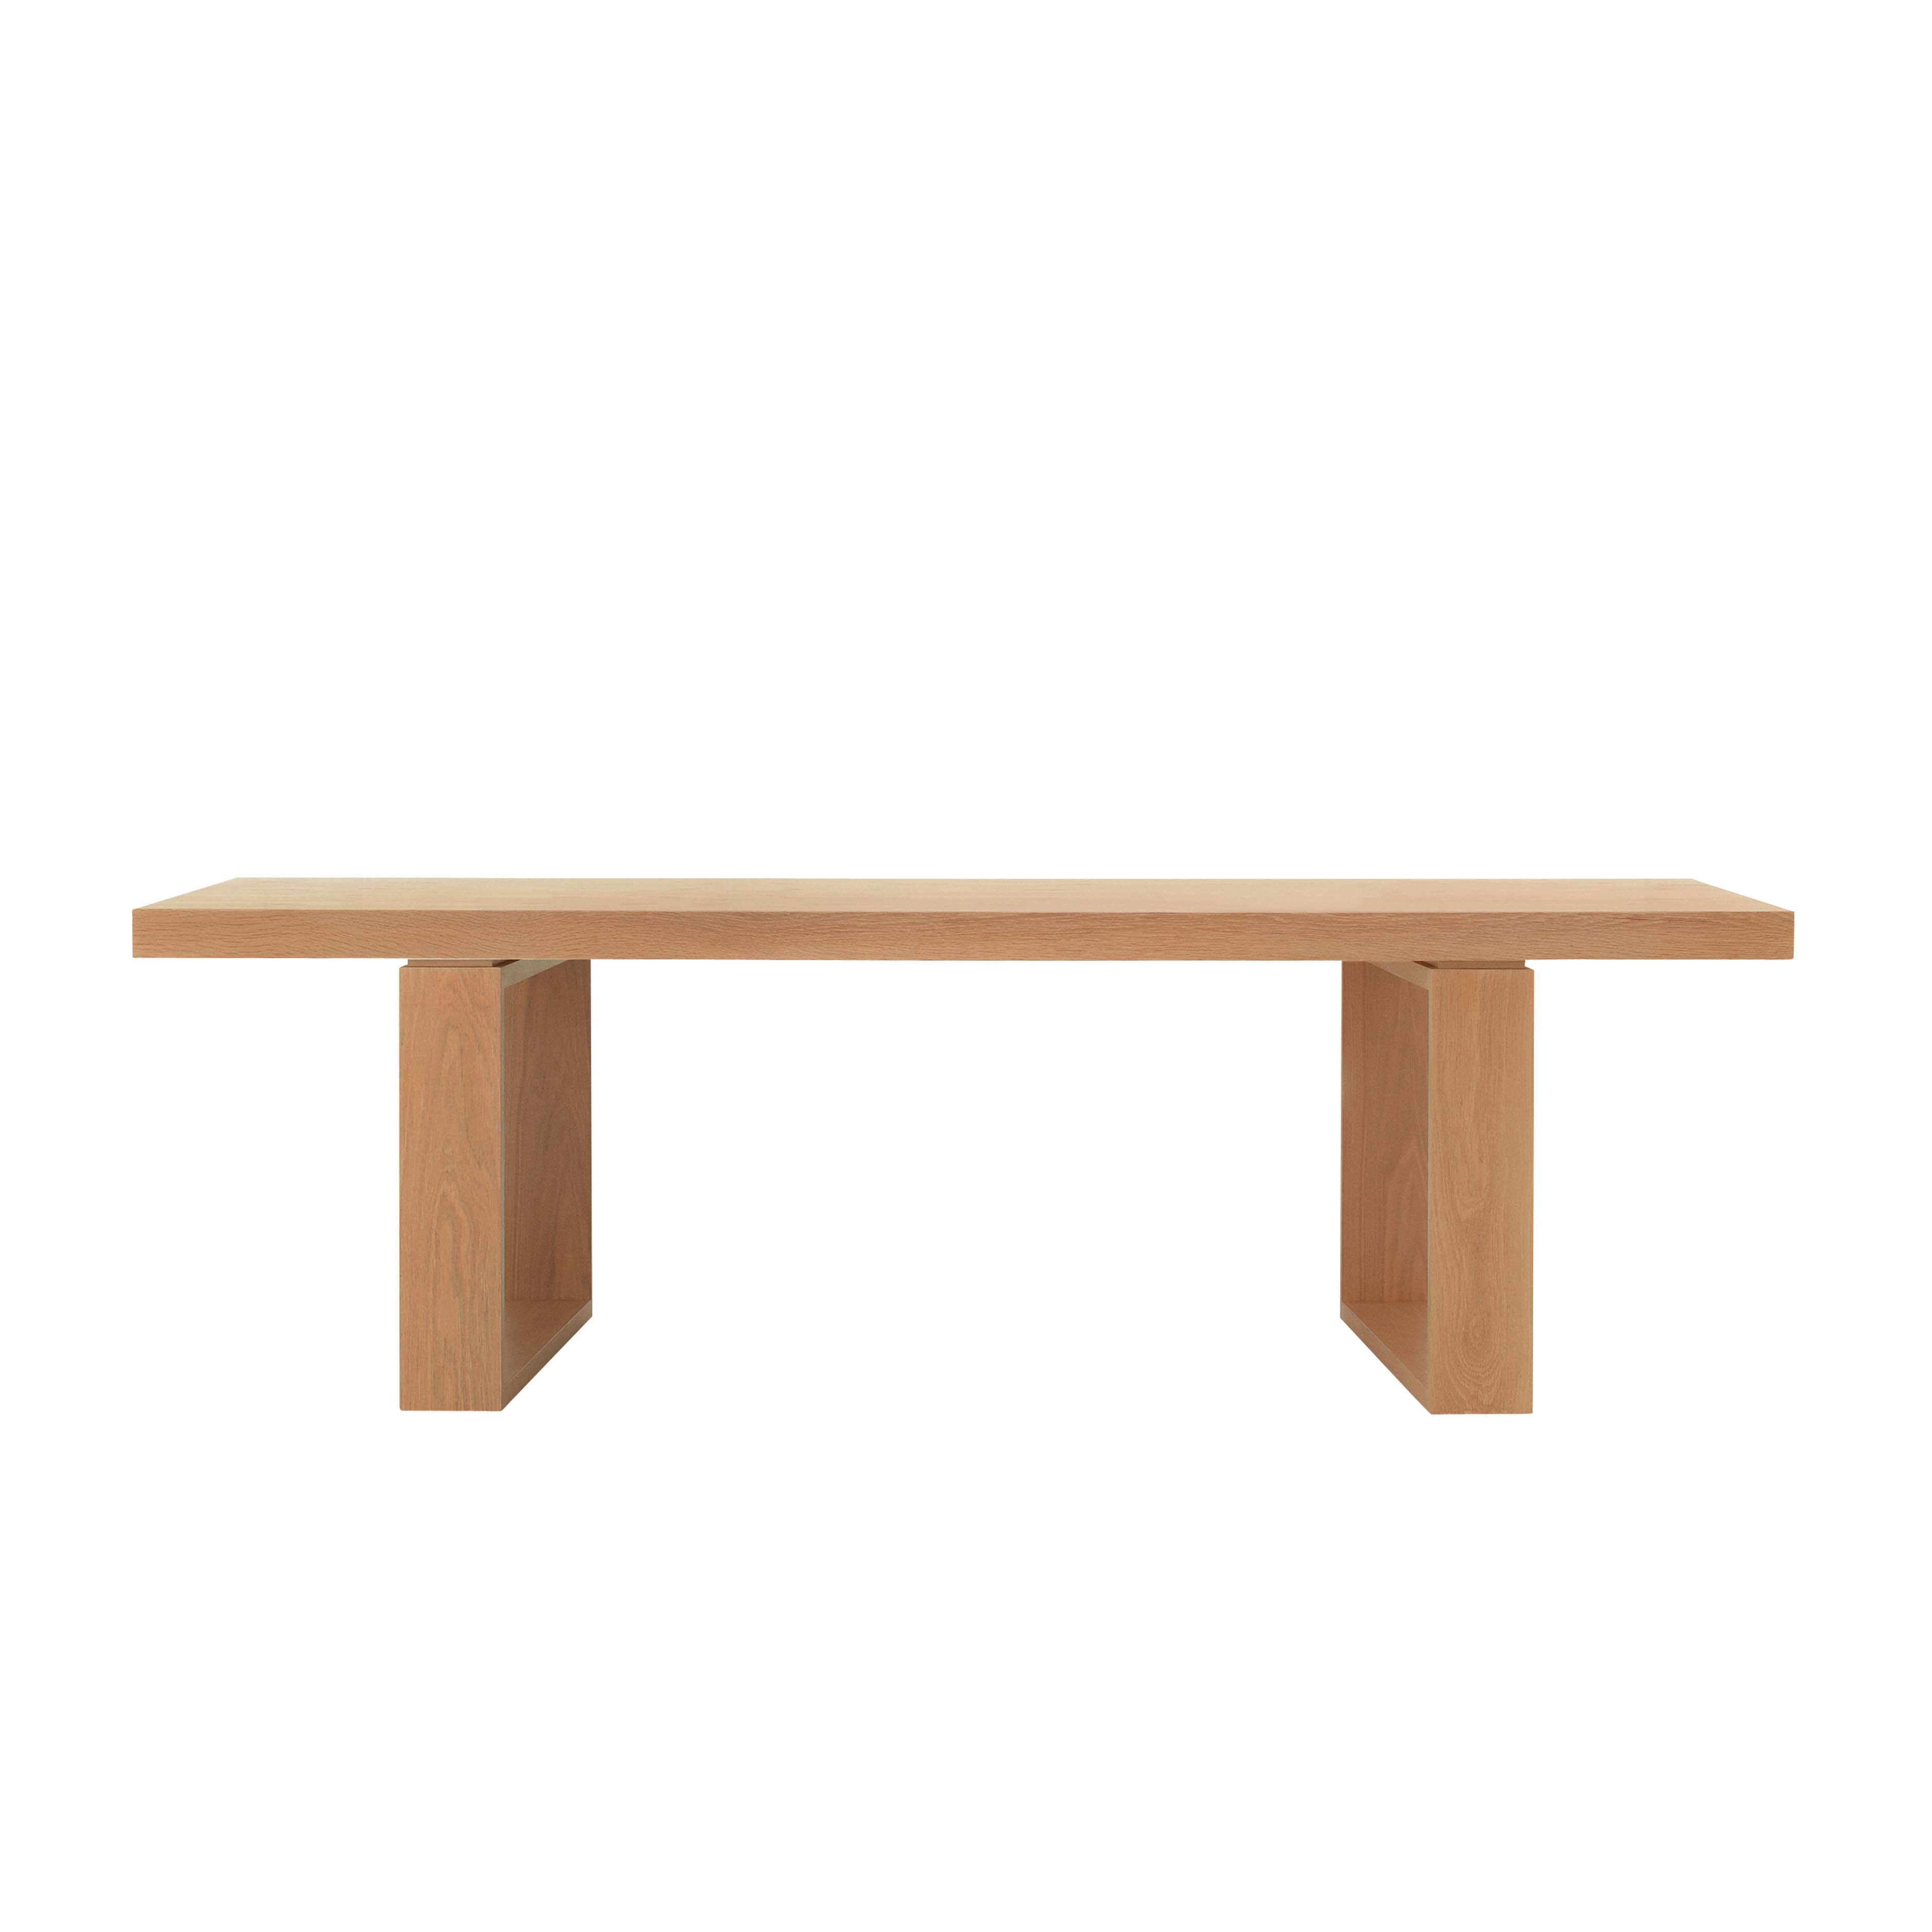 April Dining Table with Sleigh Base - Zuster Furniture